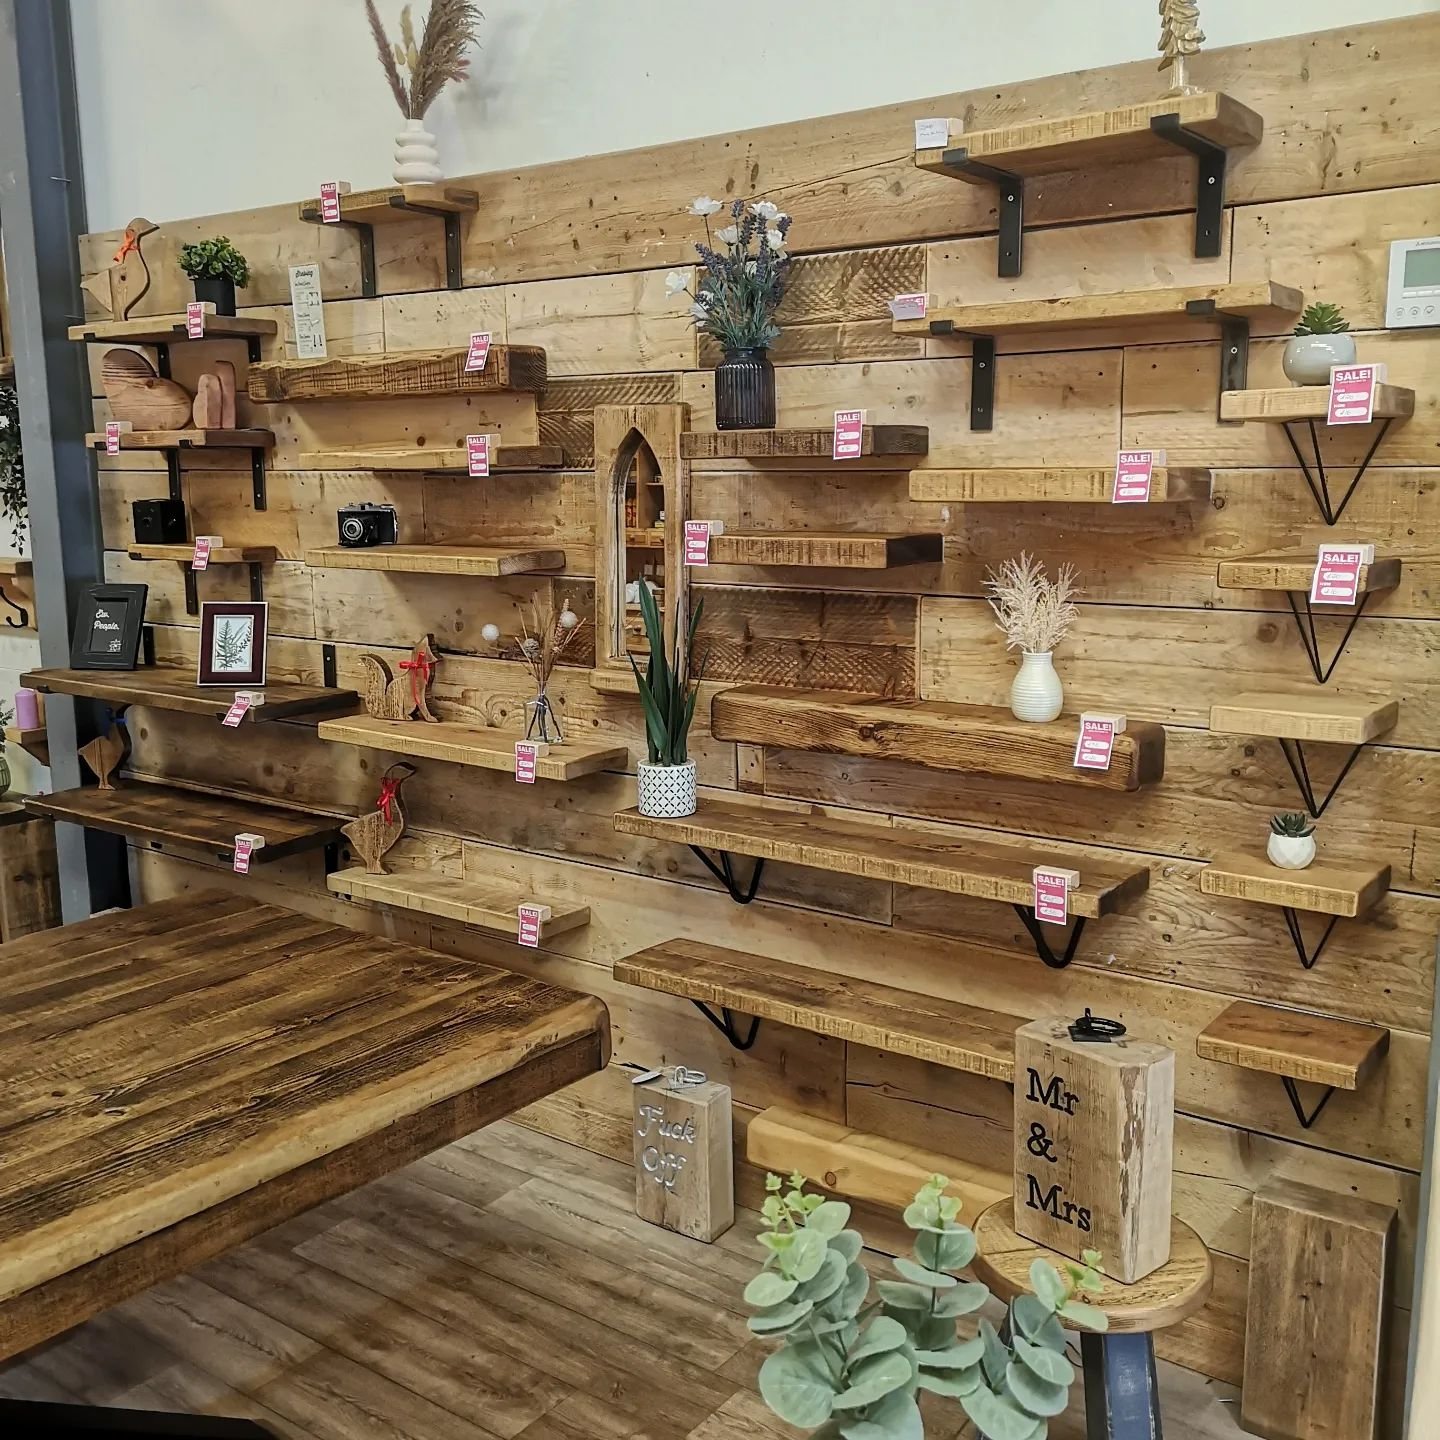 Shelf Sale Still on until end of May!

#salesalesale #sale #shelfies #shelfinspo #shelfbrackets #shelvesofinstagram #plantsofinstagram #shelf #shelves #rusticdecor #homeinspo #homelove#homesweethome #instahomewales #instahome #chunky#bohodecor #solid